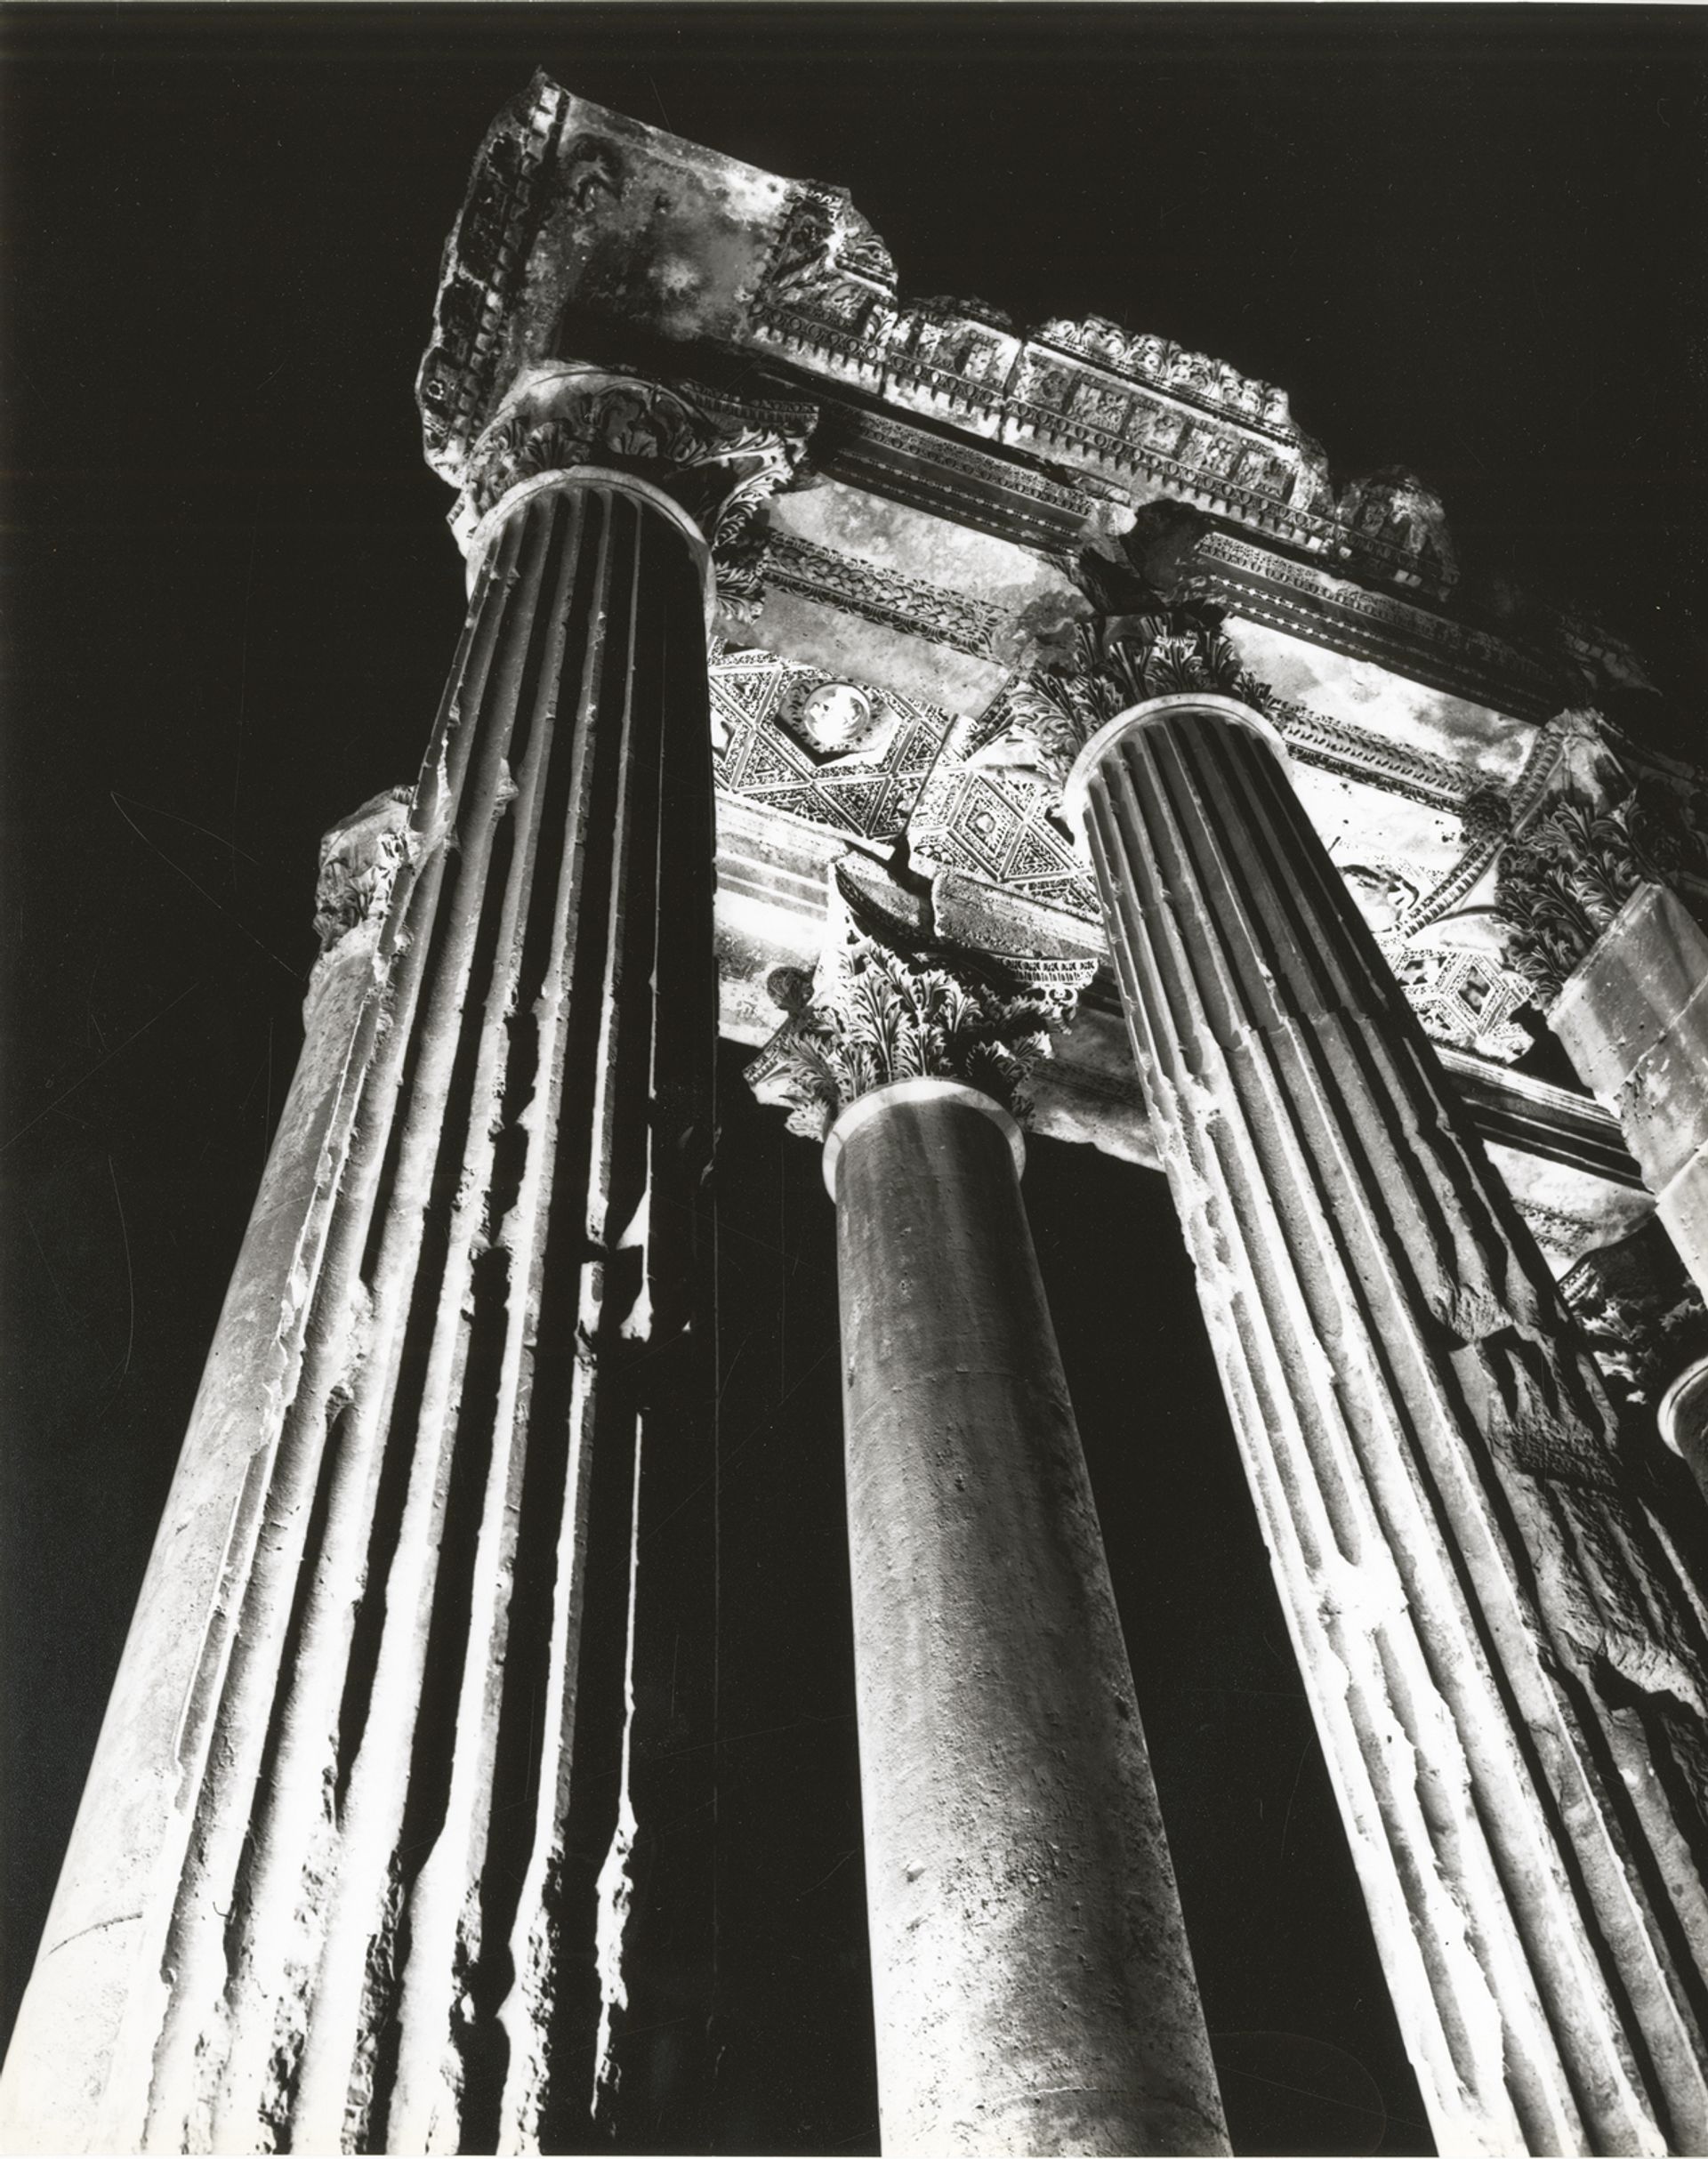 Manoug Alemian: Bacchus Temple at night, 1963 Photographic Collections of the Archives and  Special Collections, AUB Libraries